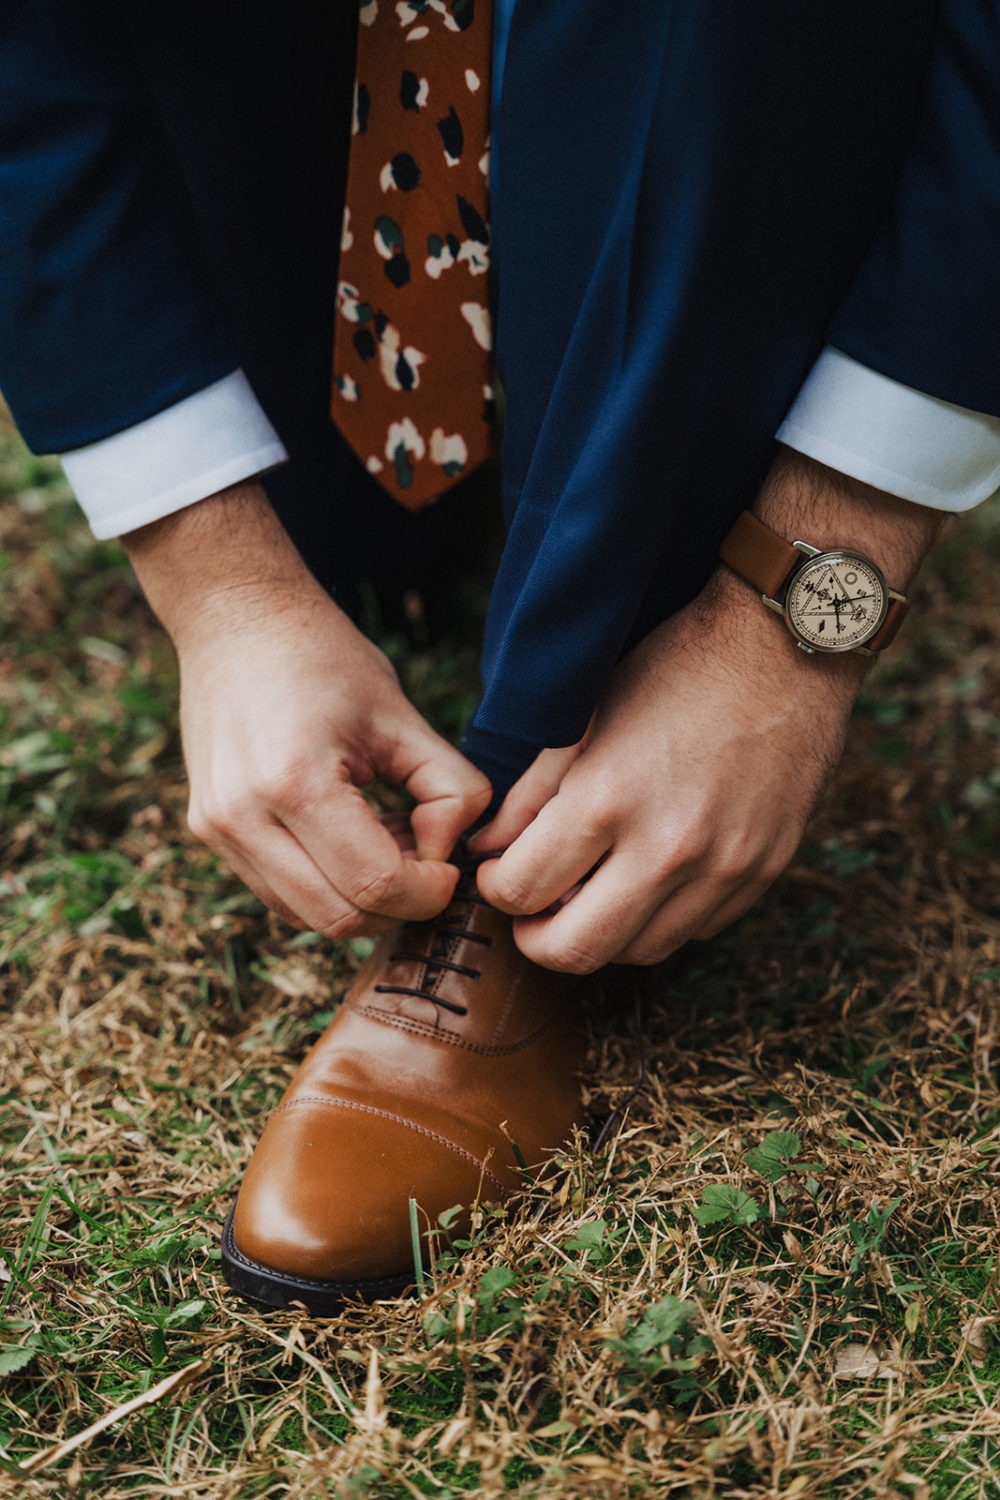 Groom ties shoelaces while getting ready at backyard wedding 